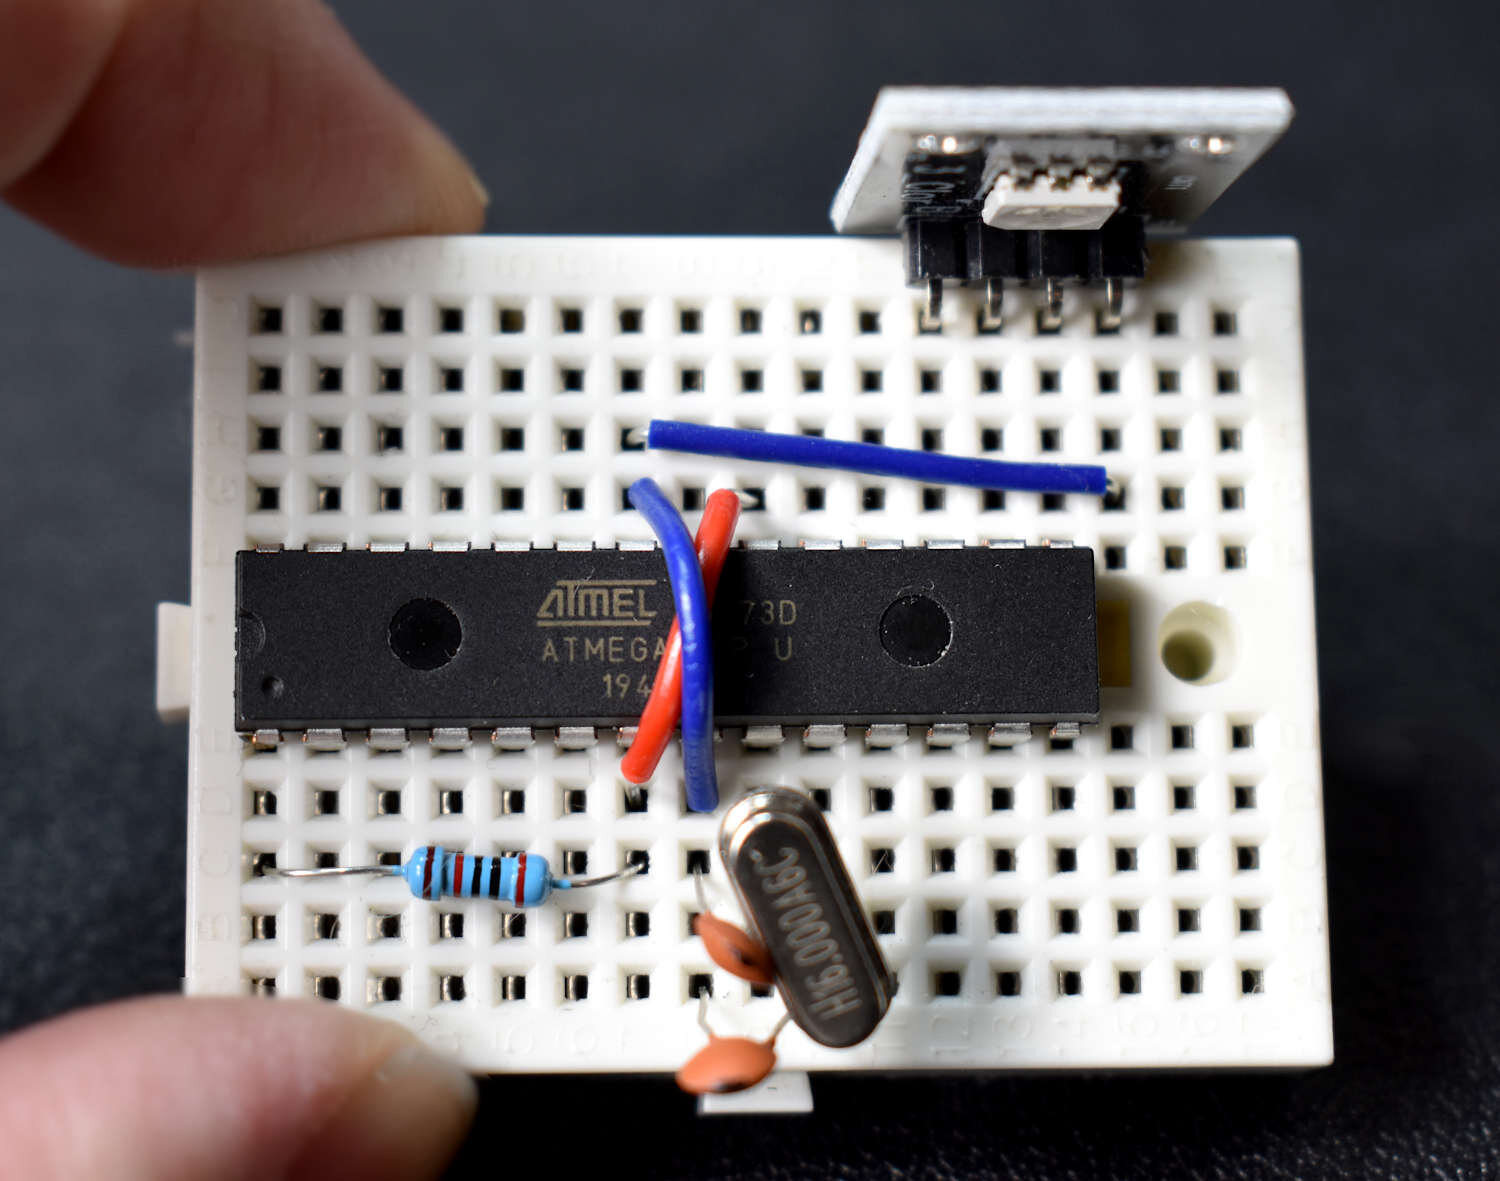 How to Build an Arduino Uno on a BreadBoard